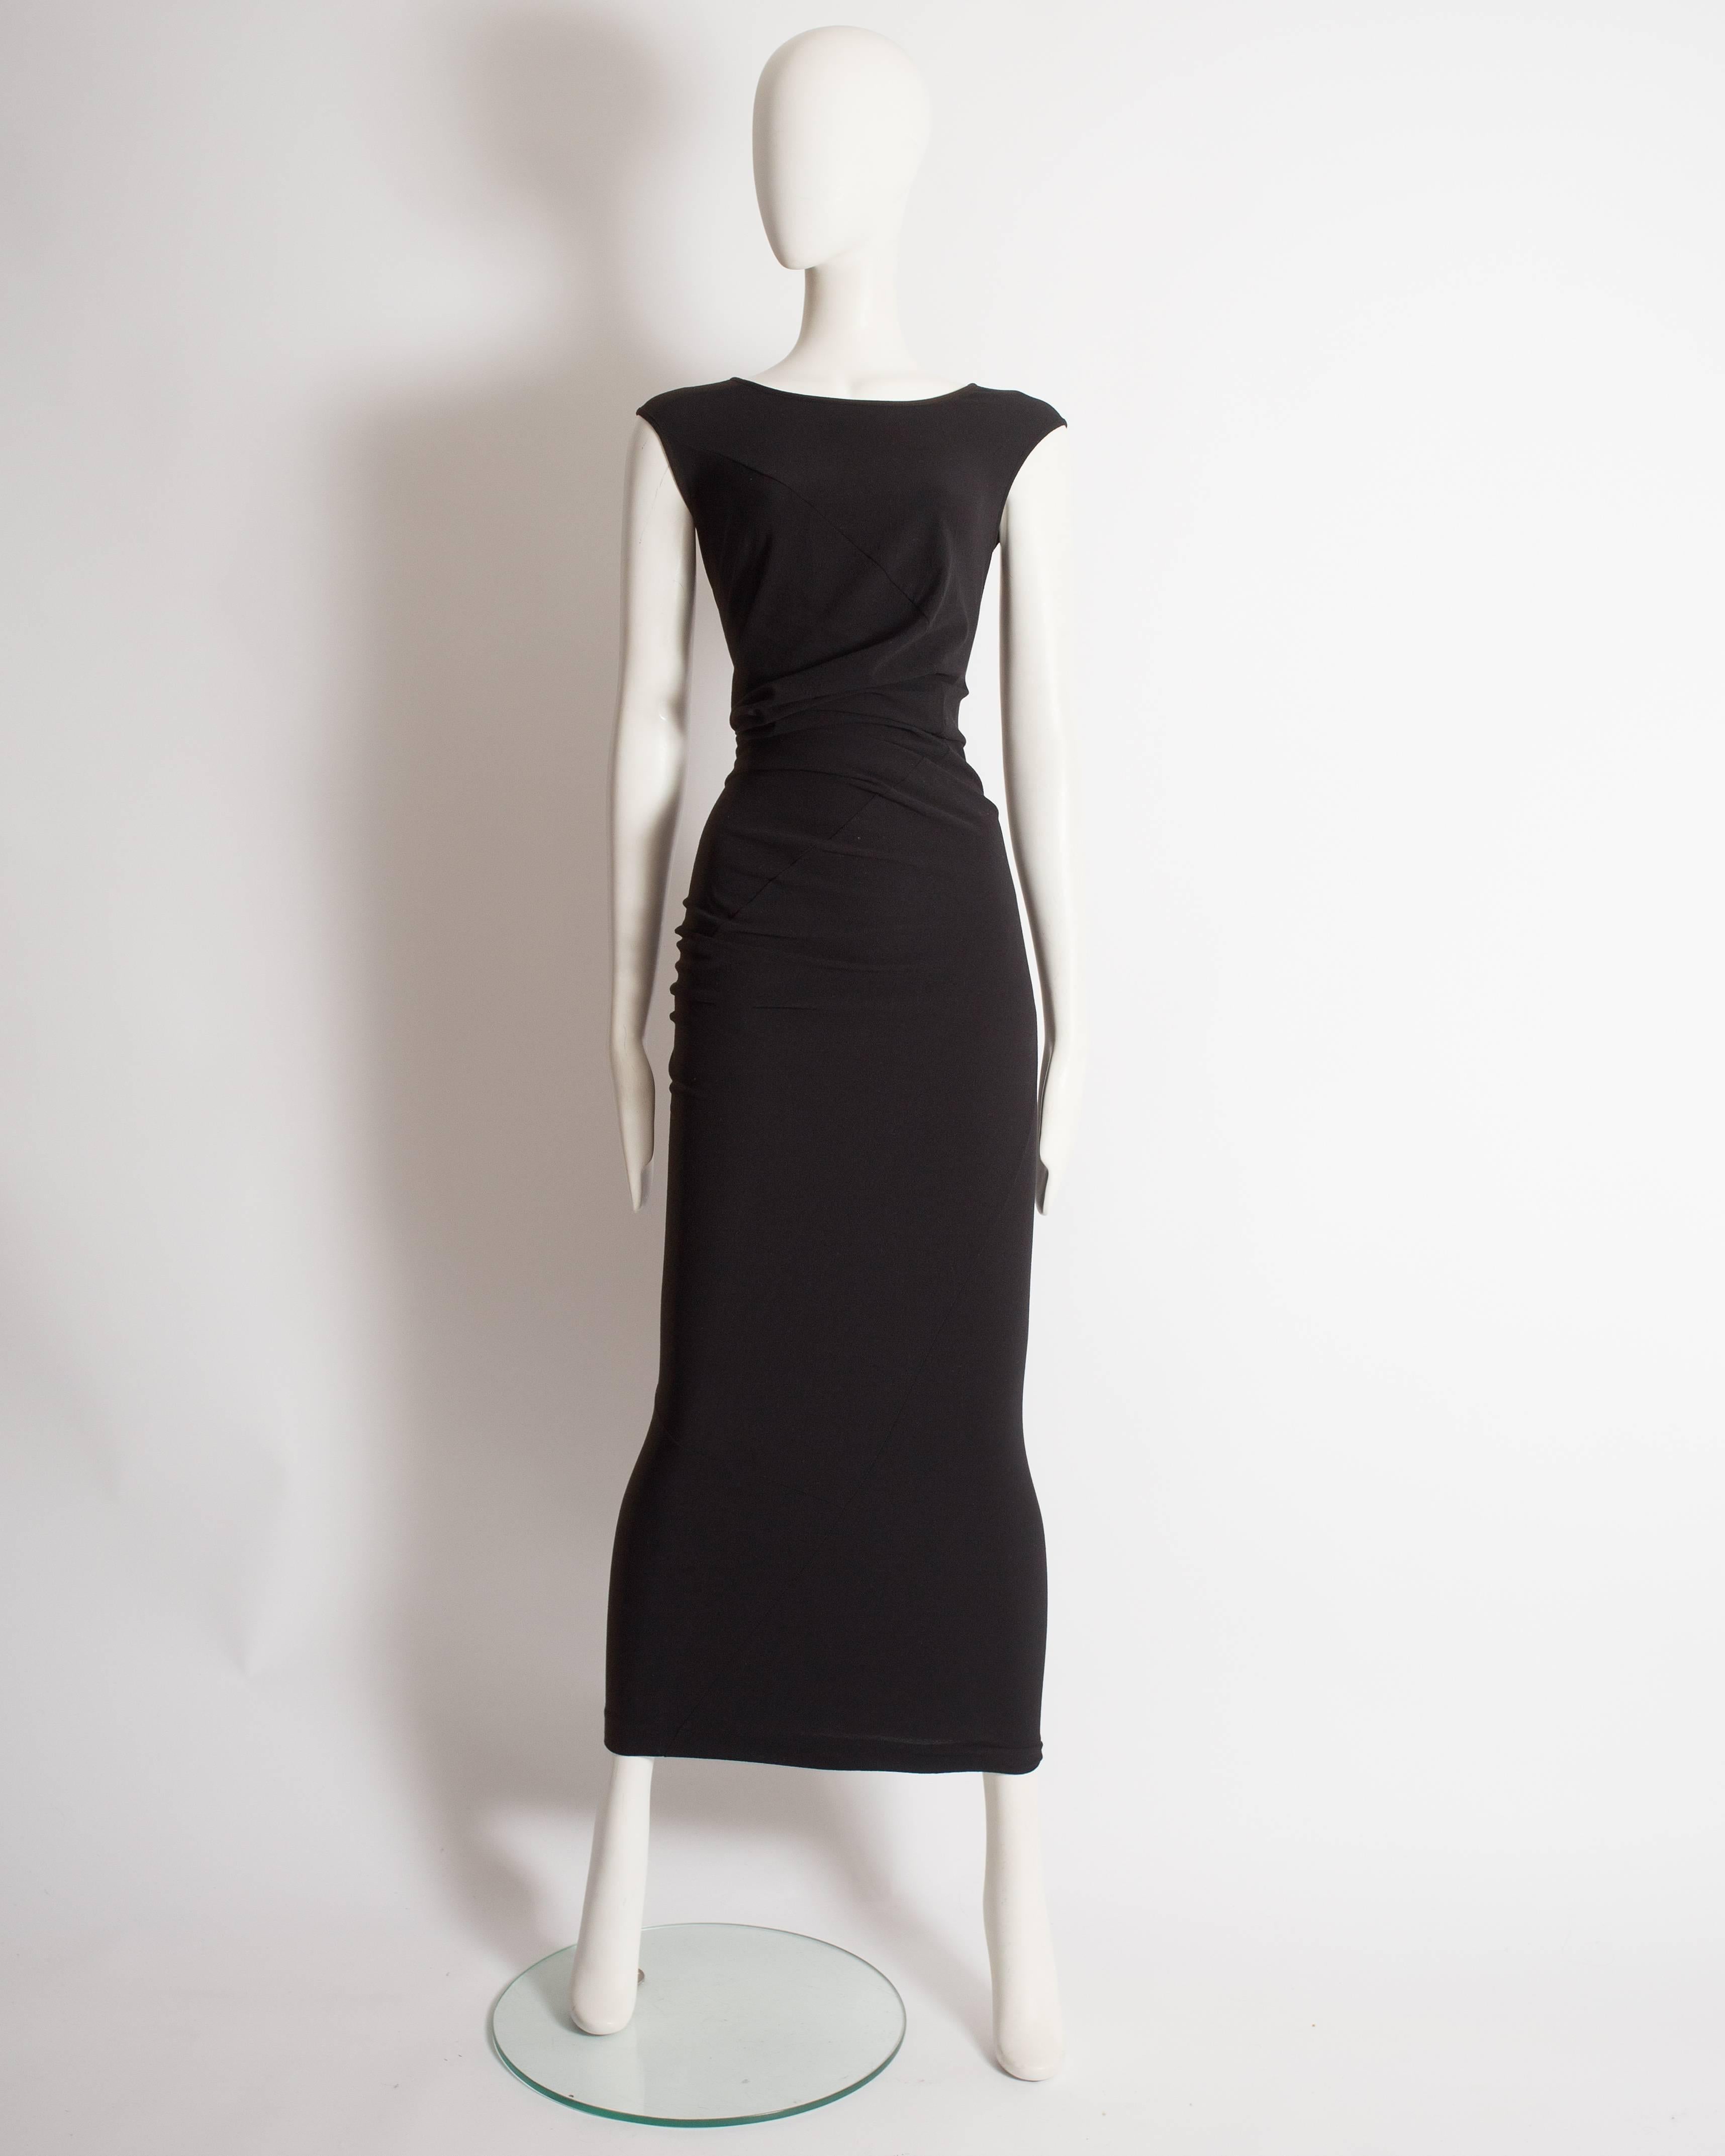 Fine and rare Comme des Garcons black stretch evening dress from the 'Body Meets Dress, Dress Meets Body' spring-summer 1997 collection. Constructed in black stretch fabric with irregular deconstructed seams throughout. Originally worn on the runway